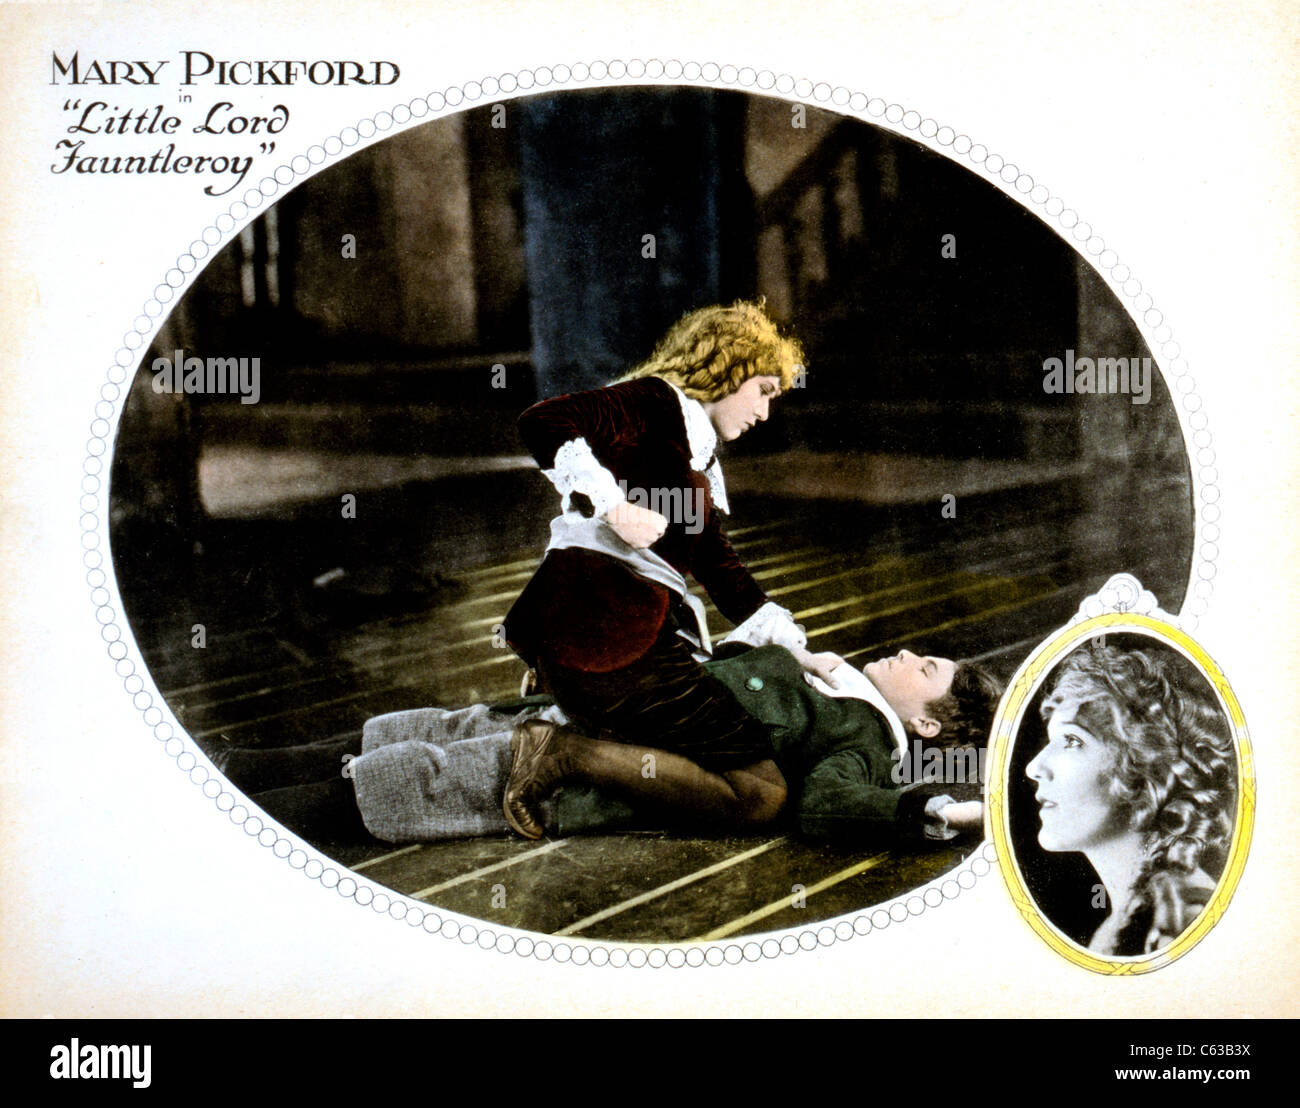 Mary Pickford in 'Little Lord Fauntleroy' 1921 movie poster Stock Photo